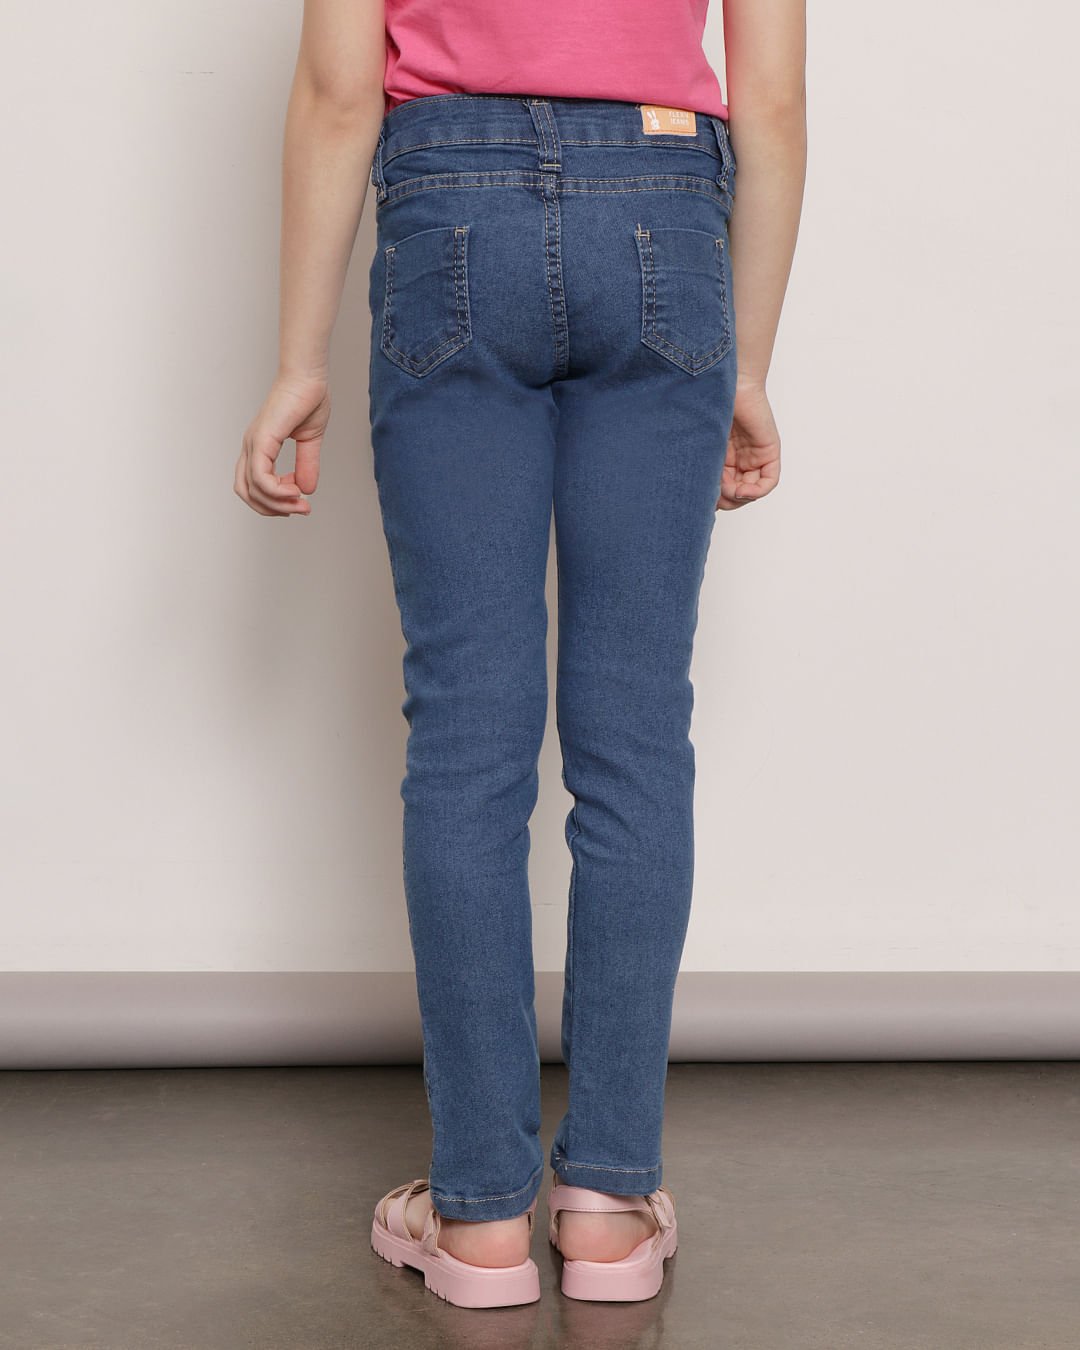 Calca-Jeans-10019-6812-Lc-Bsc-F-48---Blue-Jeans-Claro